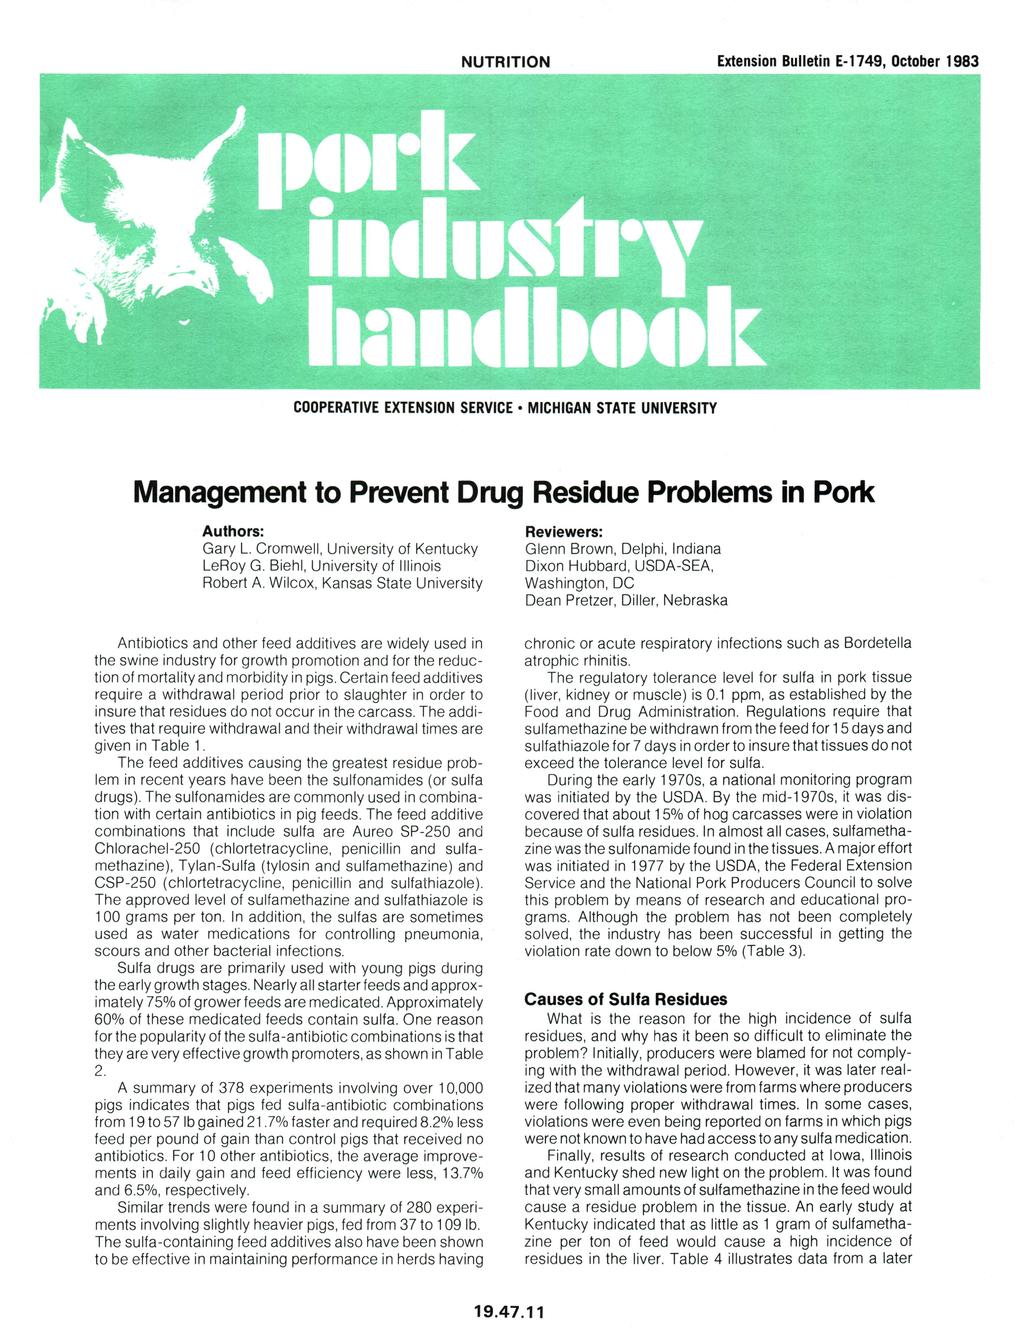 NUTRITION Extension Bulletin E-1749, October 1983 COOPERATIVE EXTENSION SERVICE MICHIGAN STATE UNIVERSITY Management to Prevent Drug Residue Problems in Pork Authors: Gary L.